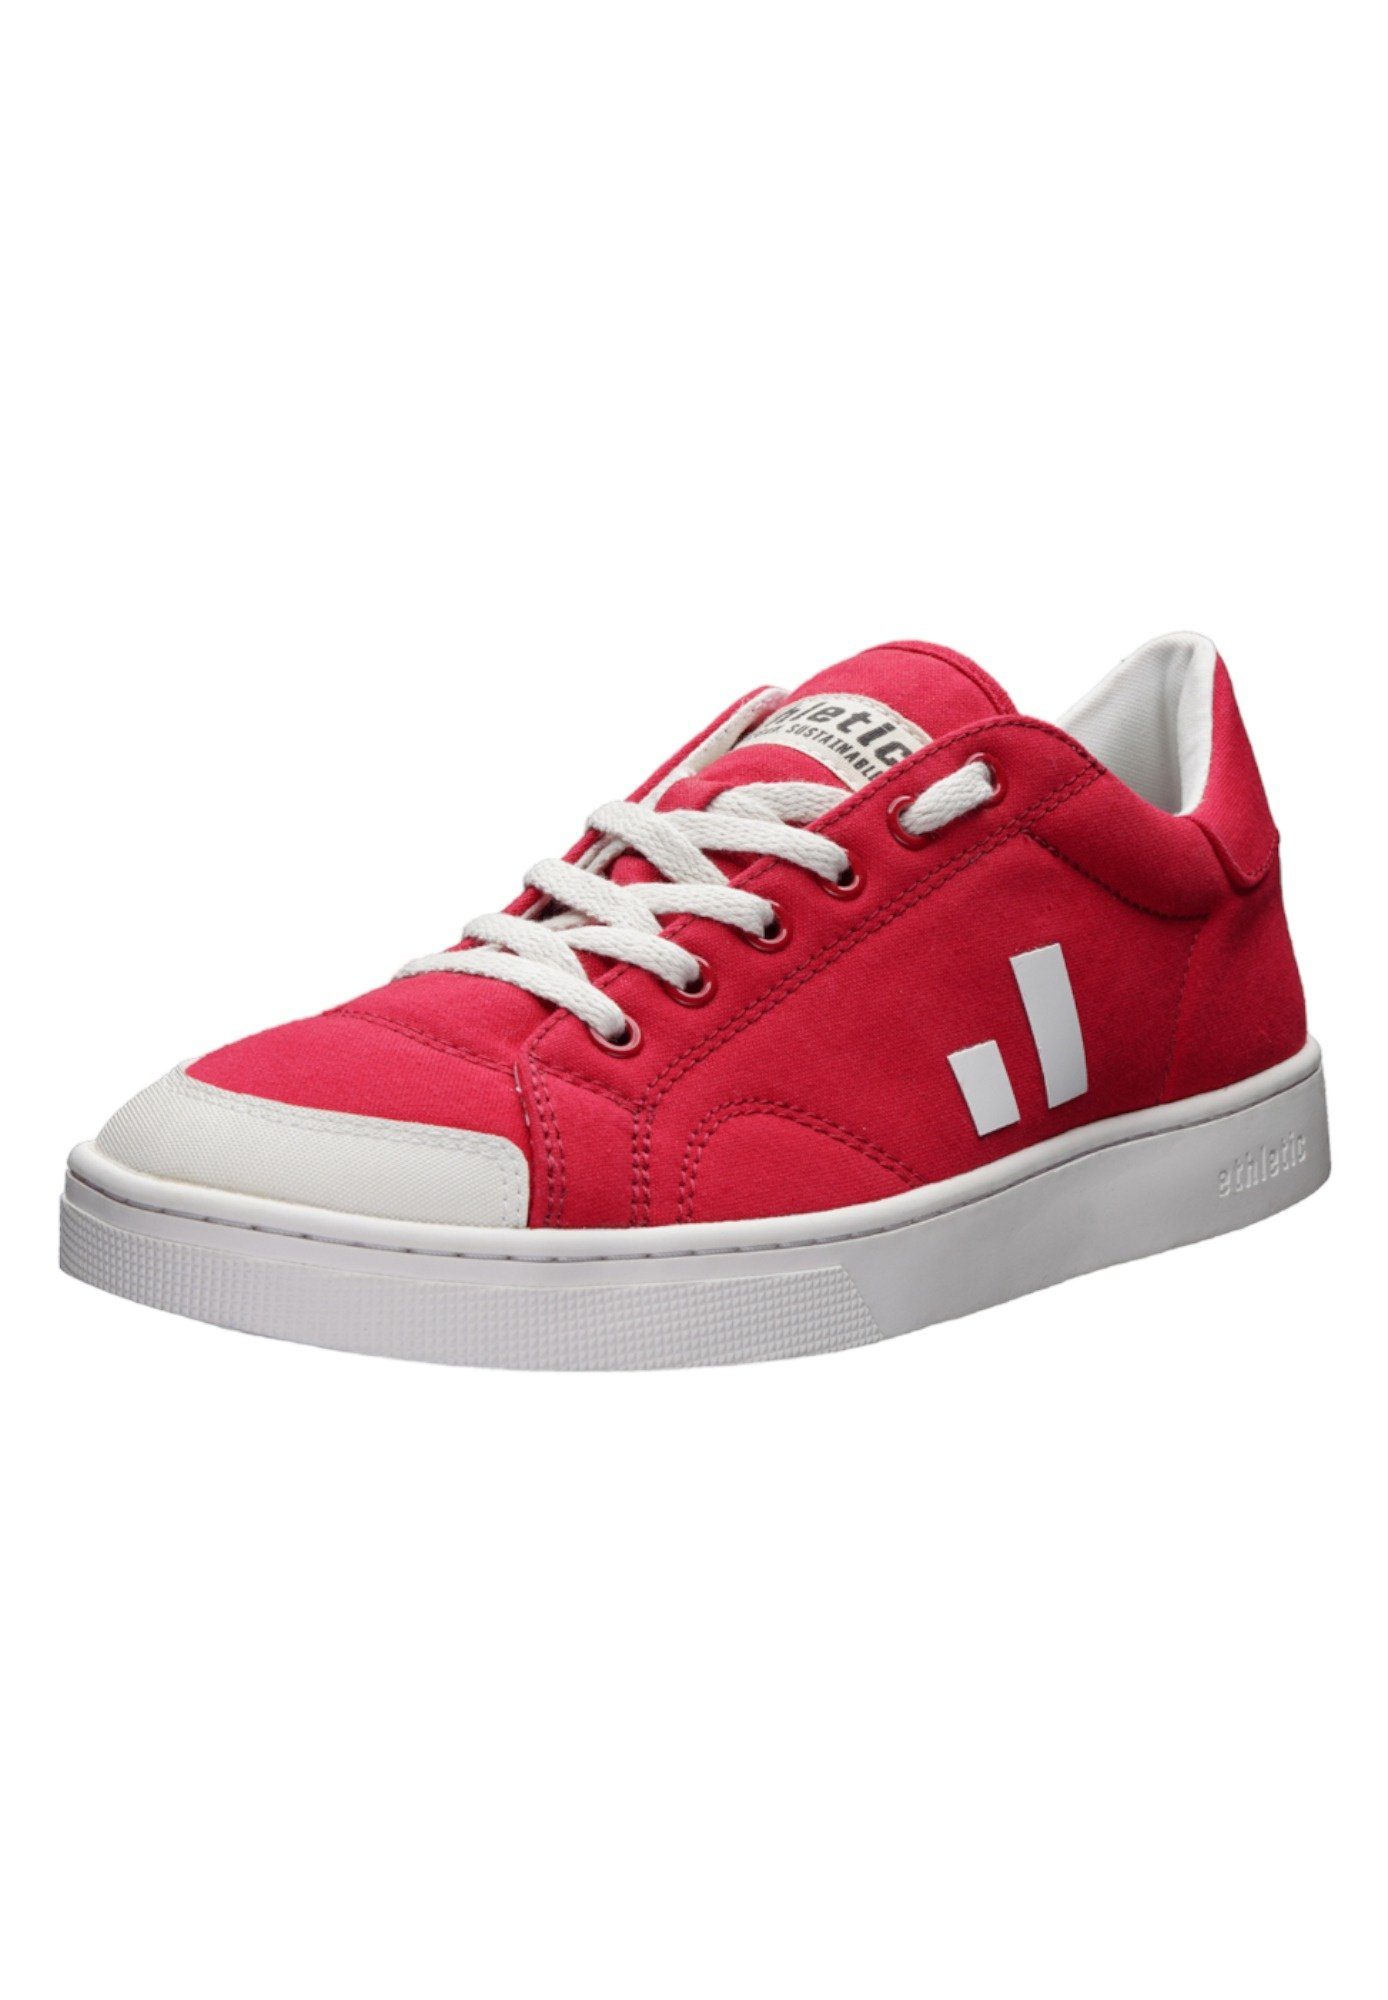 ETHLETIC White Red Lo - Produkt Cranberry Cut Just Sneaker Active Fairtrade